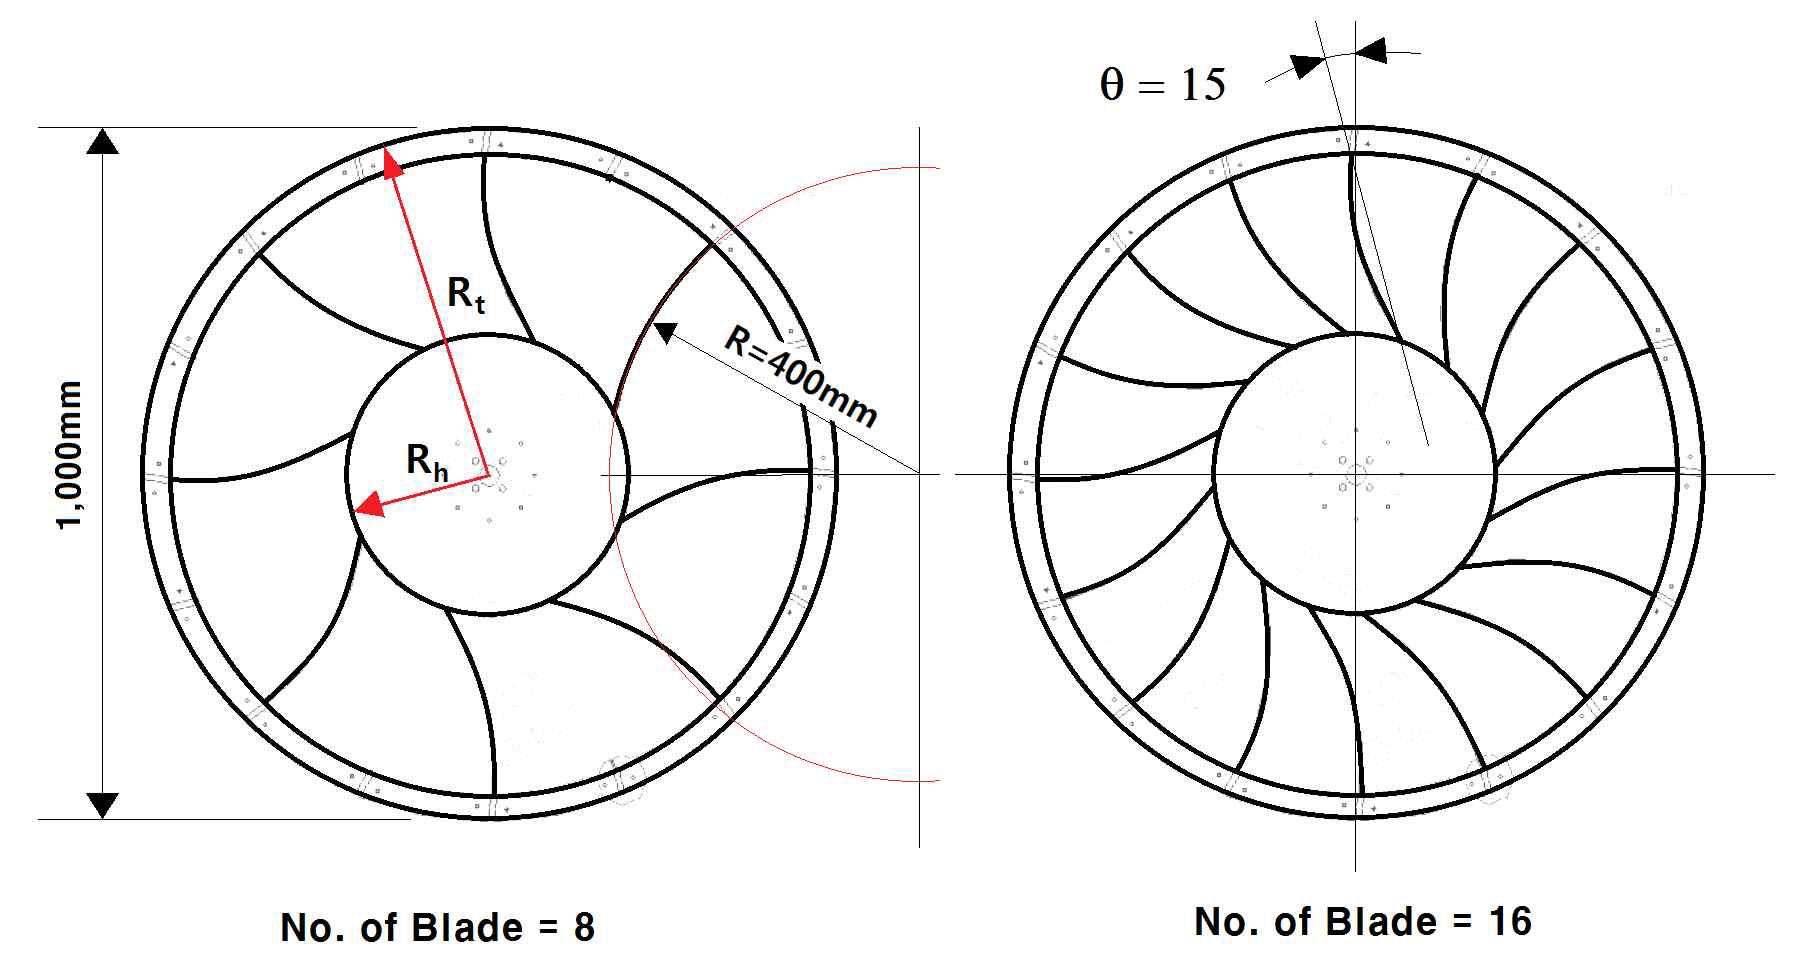 2-Dimensional view of the model turbine impeller and its geometry.